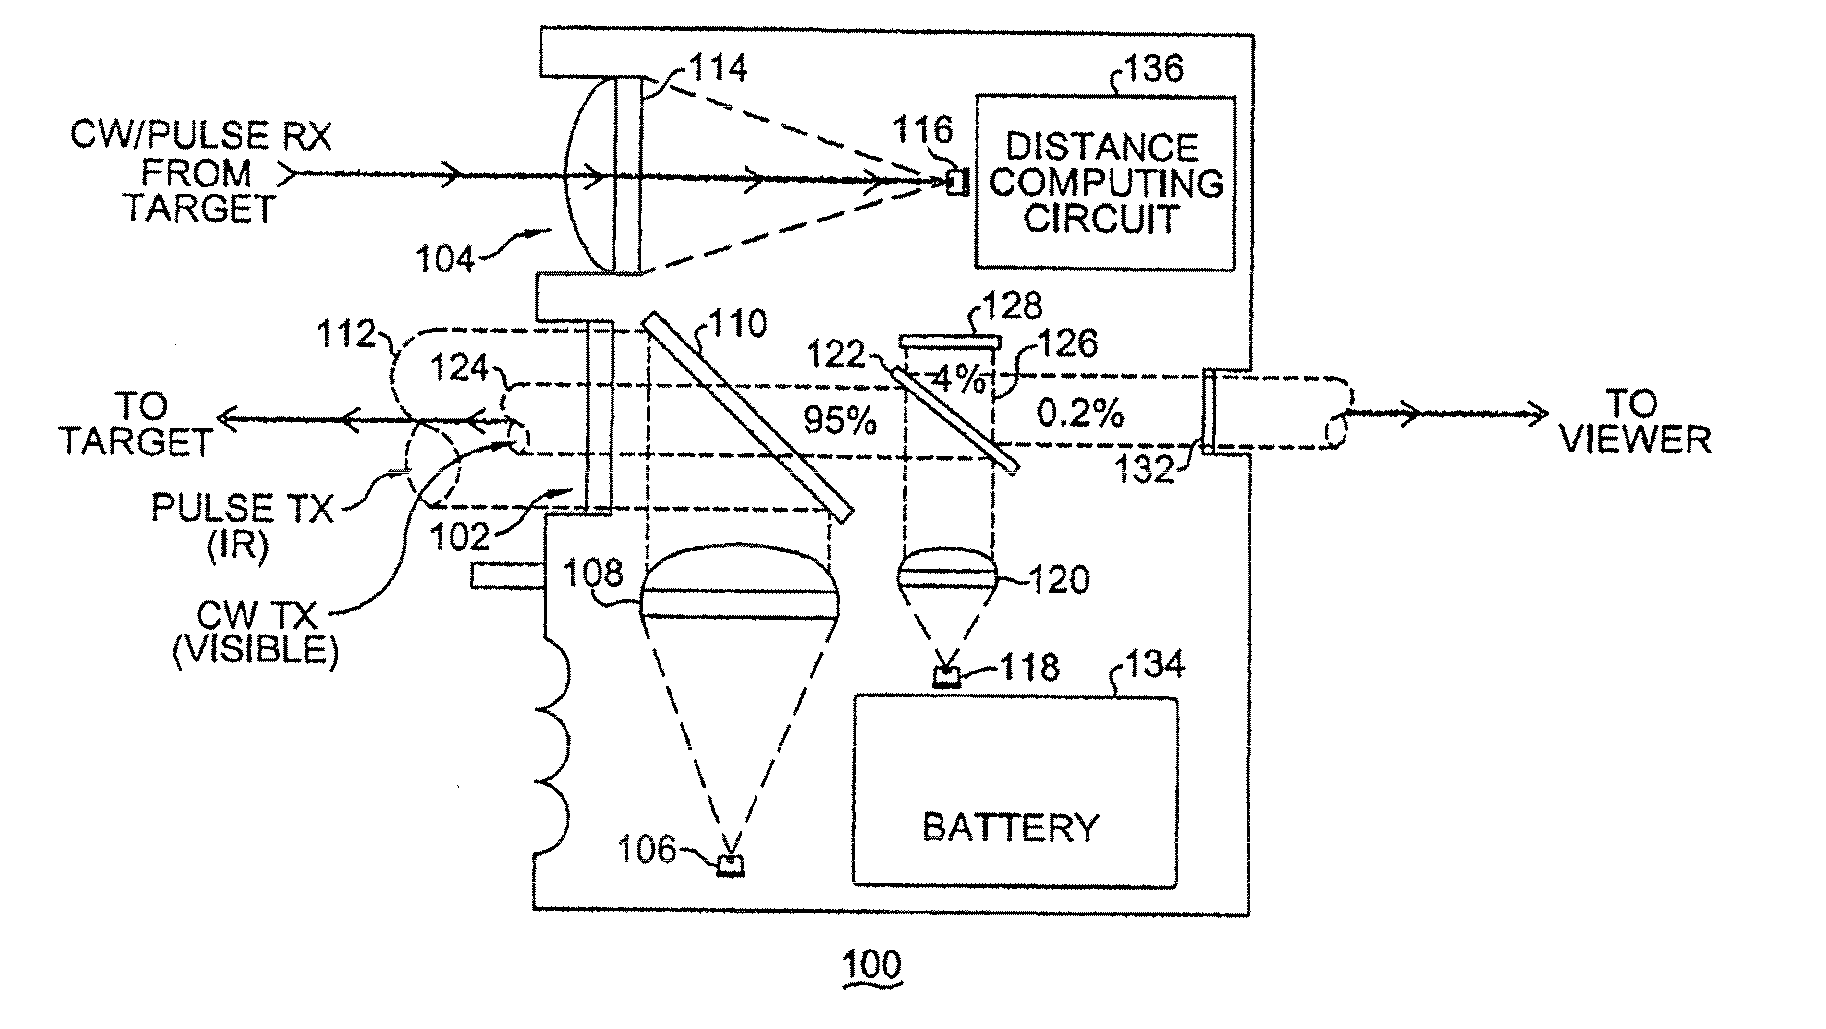 System and method for a rangefinding instrument incorporating pulse and continuous wave signal generating and processing techniques for increased distance measurement accuracy